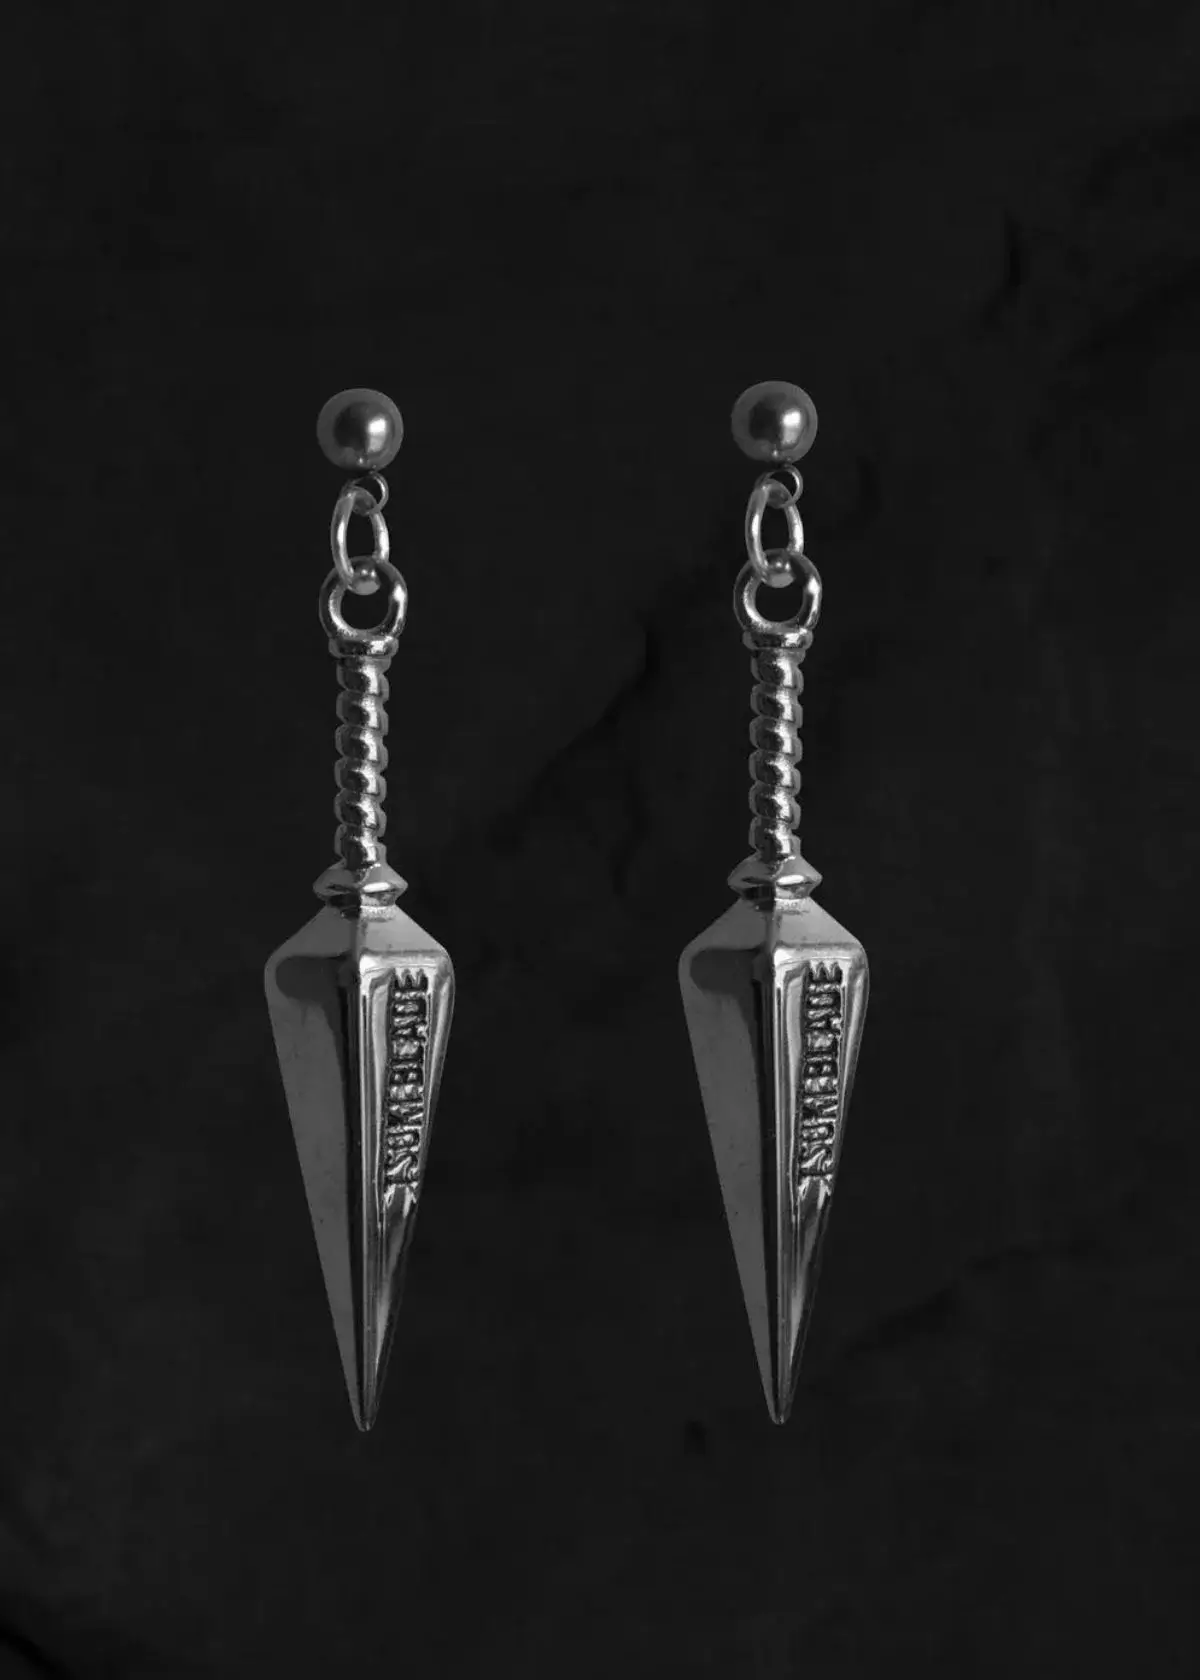 Are kunai earrings appropriate for all occasions?